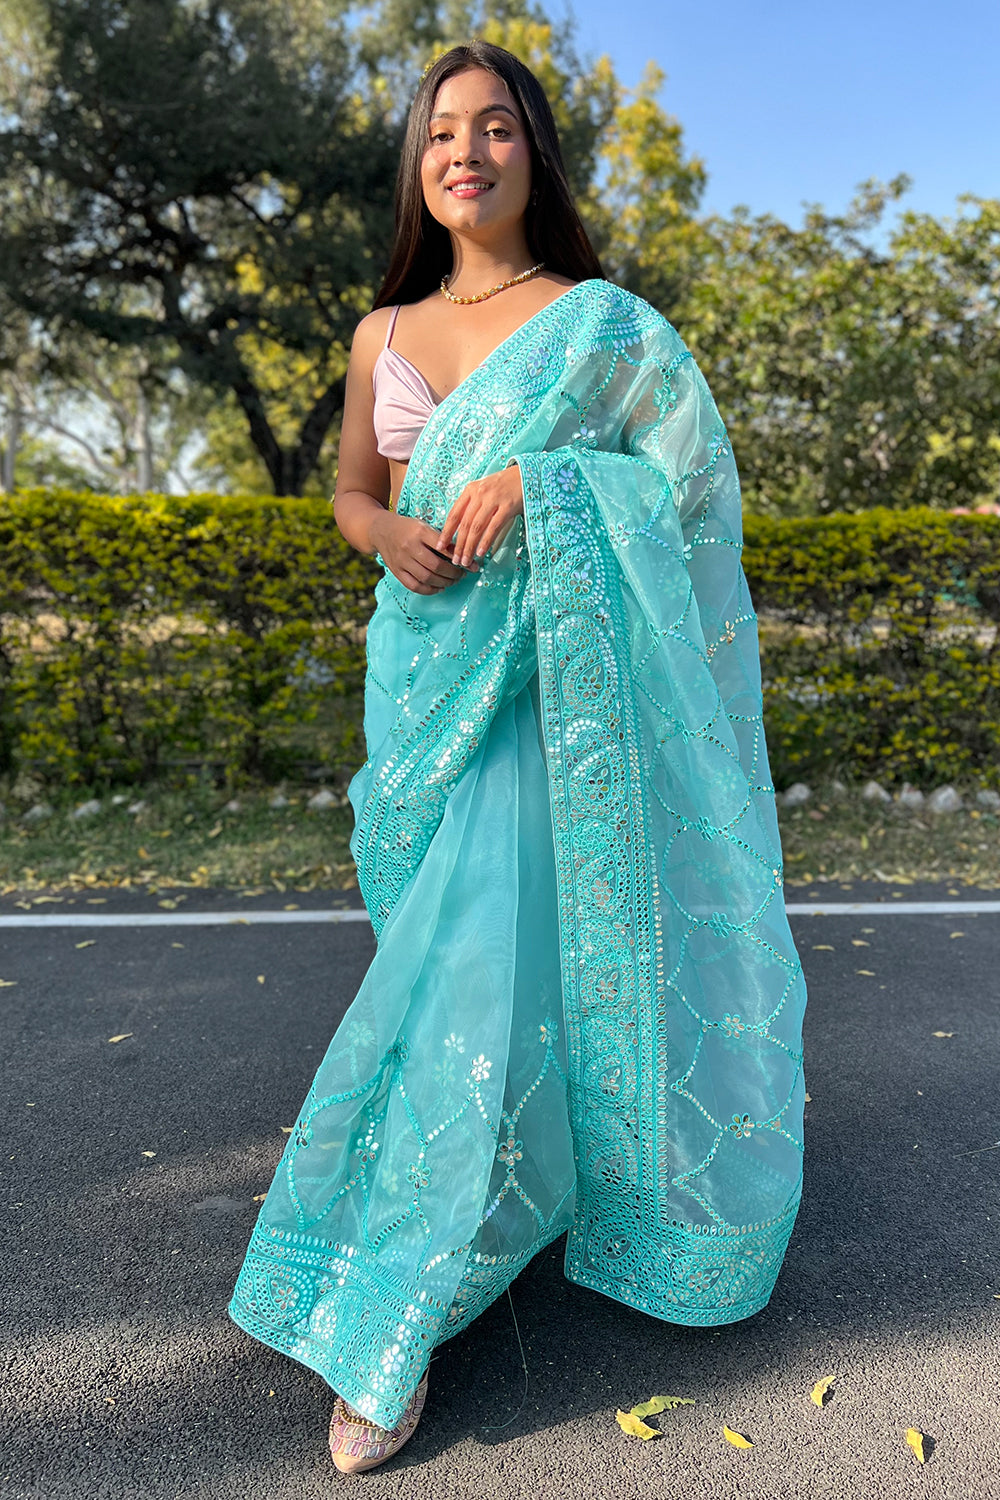 Soft Pure Organza Saree With Emrodiery Work on Blouse and Border,indian  Saree,party Wear Saree,women Dress,wedding Clothing, Wedding Saree - Etsy